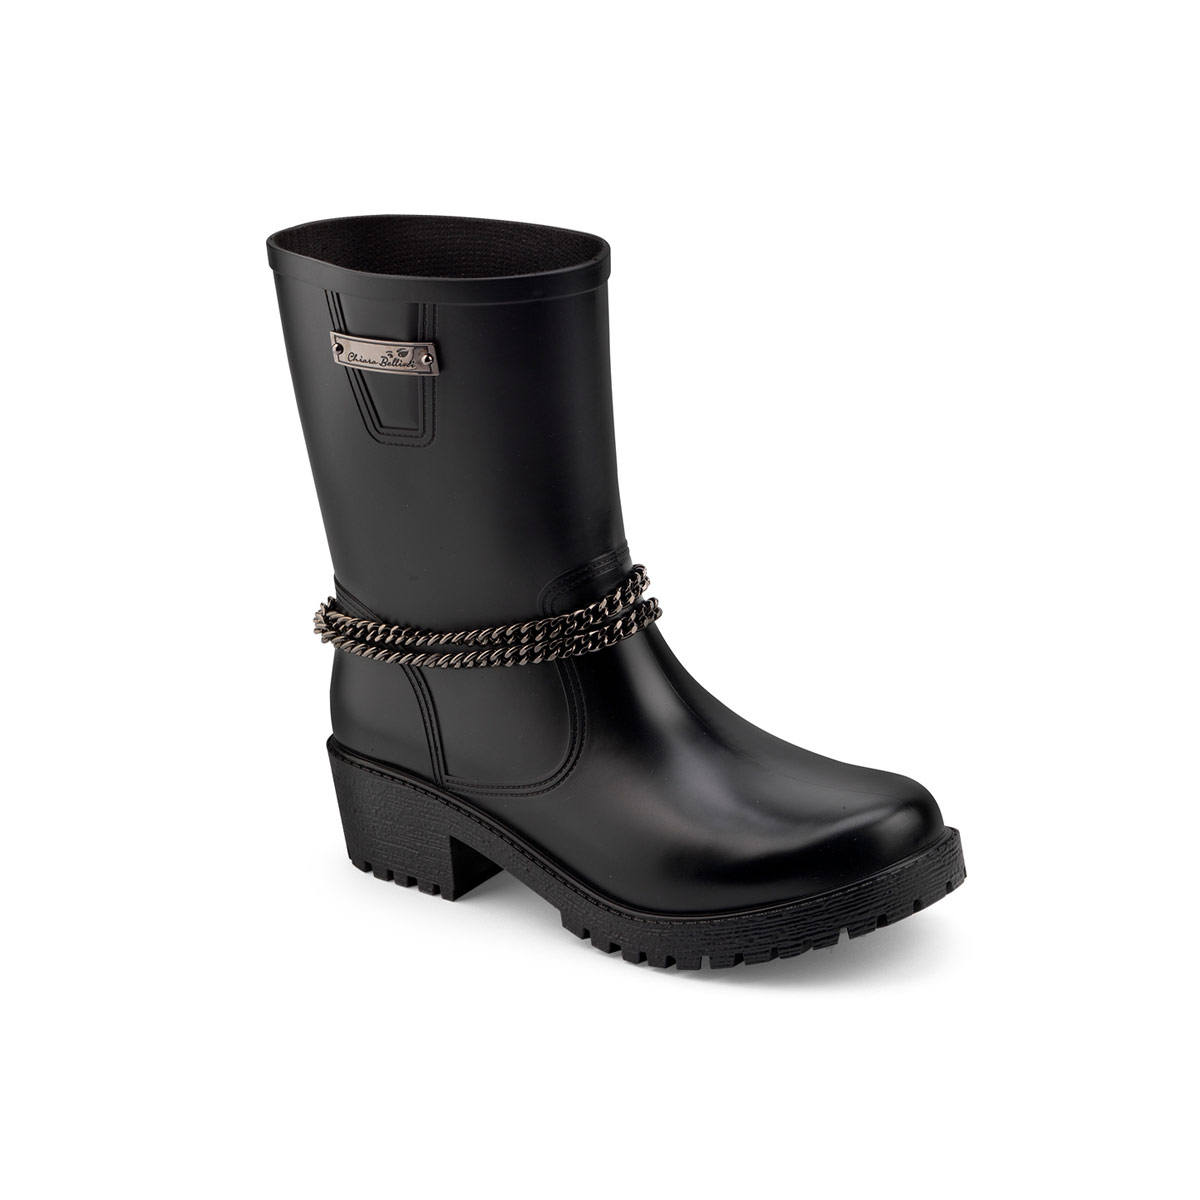 Biker boot with a double ankle chain